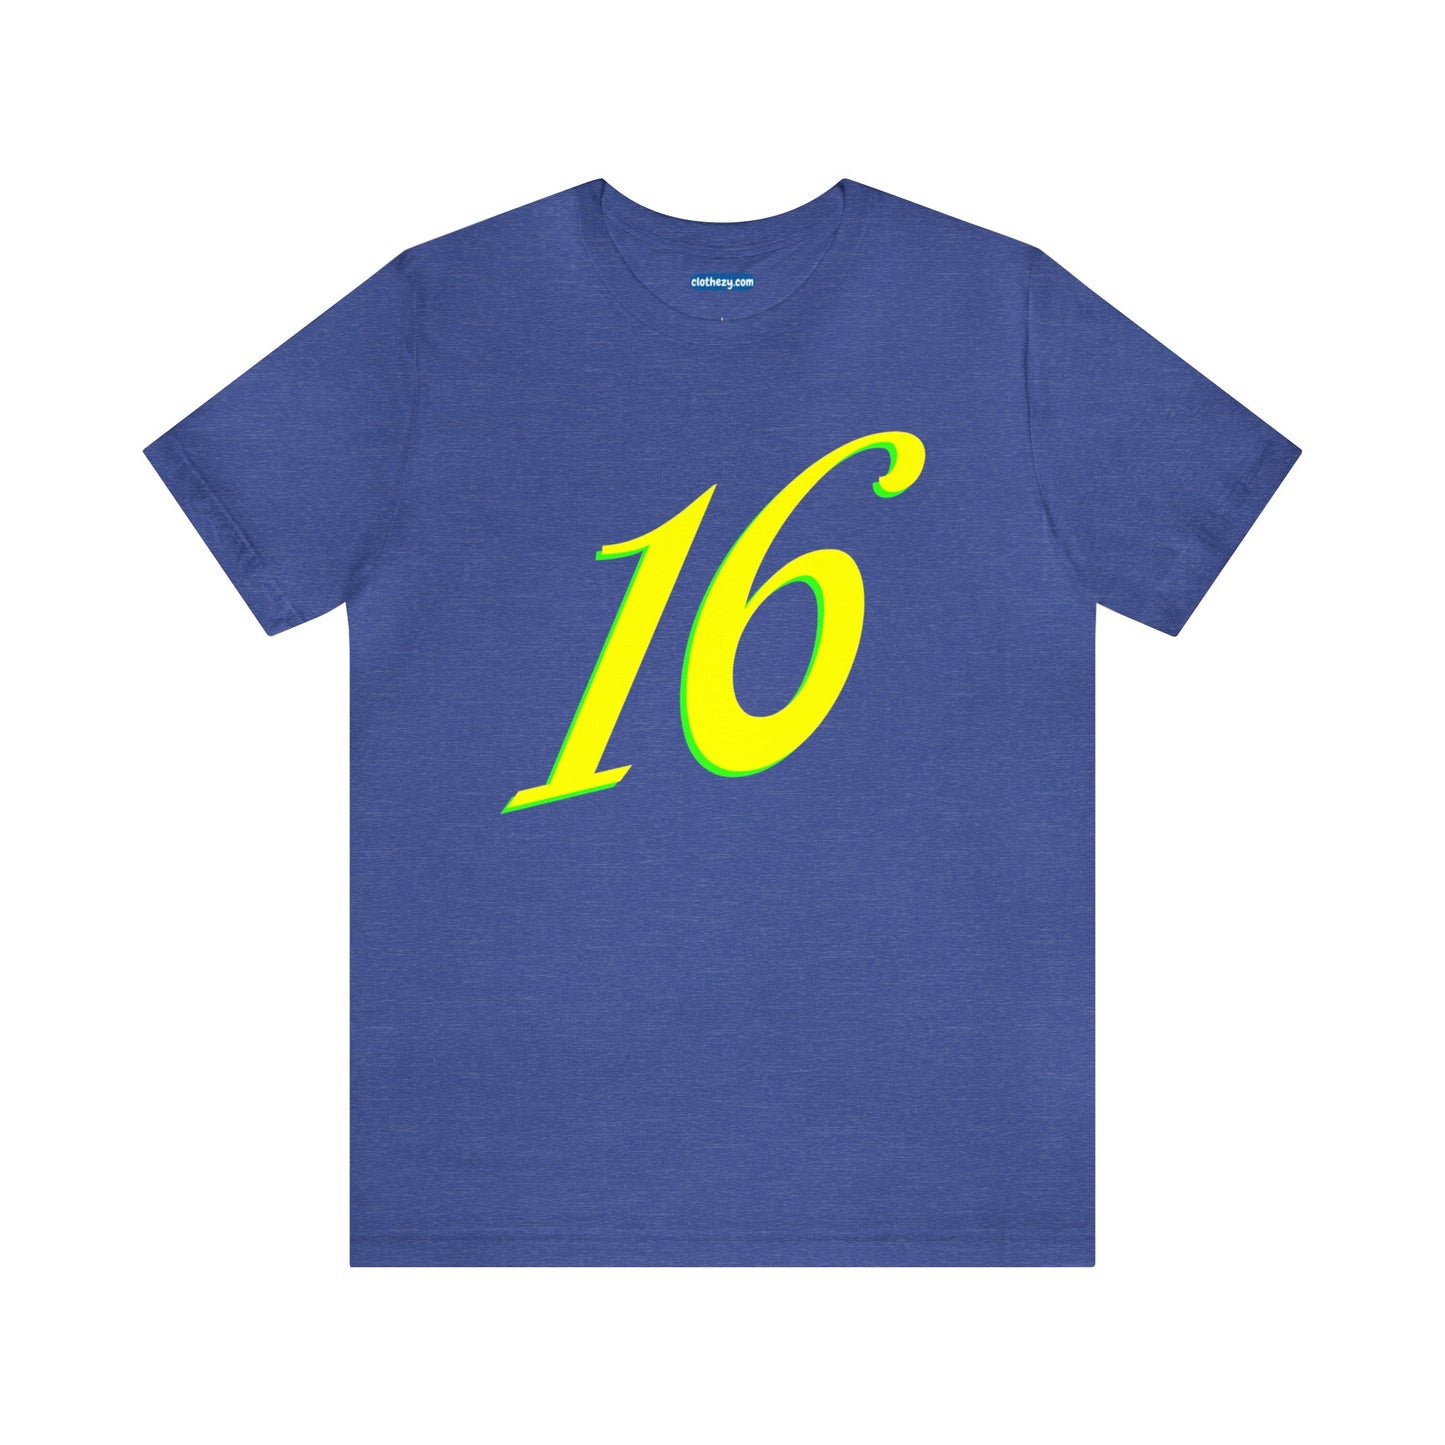 Number 16 Design - Soft Cotton Tee for birthdays and celebrations, Gift for friends and family, Multiple Options by clothezy.com in Navy Size Small - Buy Now